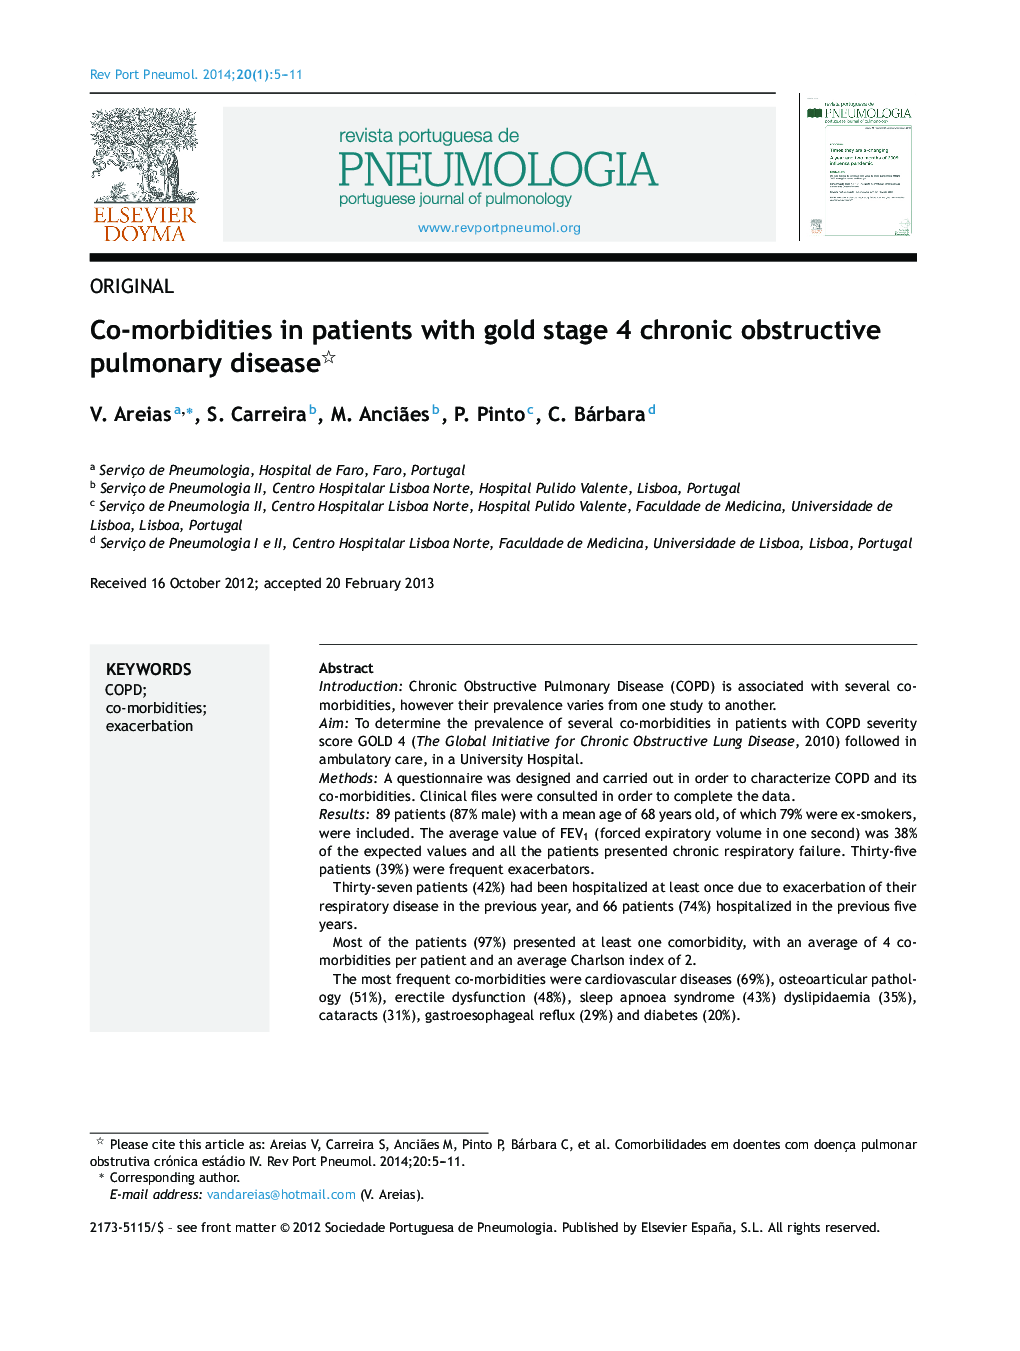 Co-morbidities in patients with gold stage 4 chronic obstructive pulmonary disease 